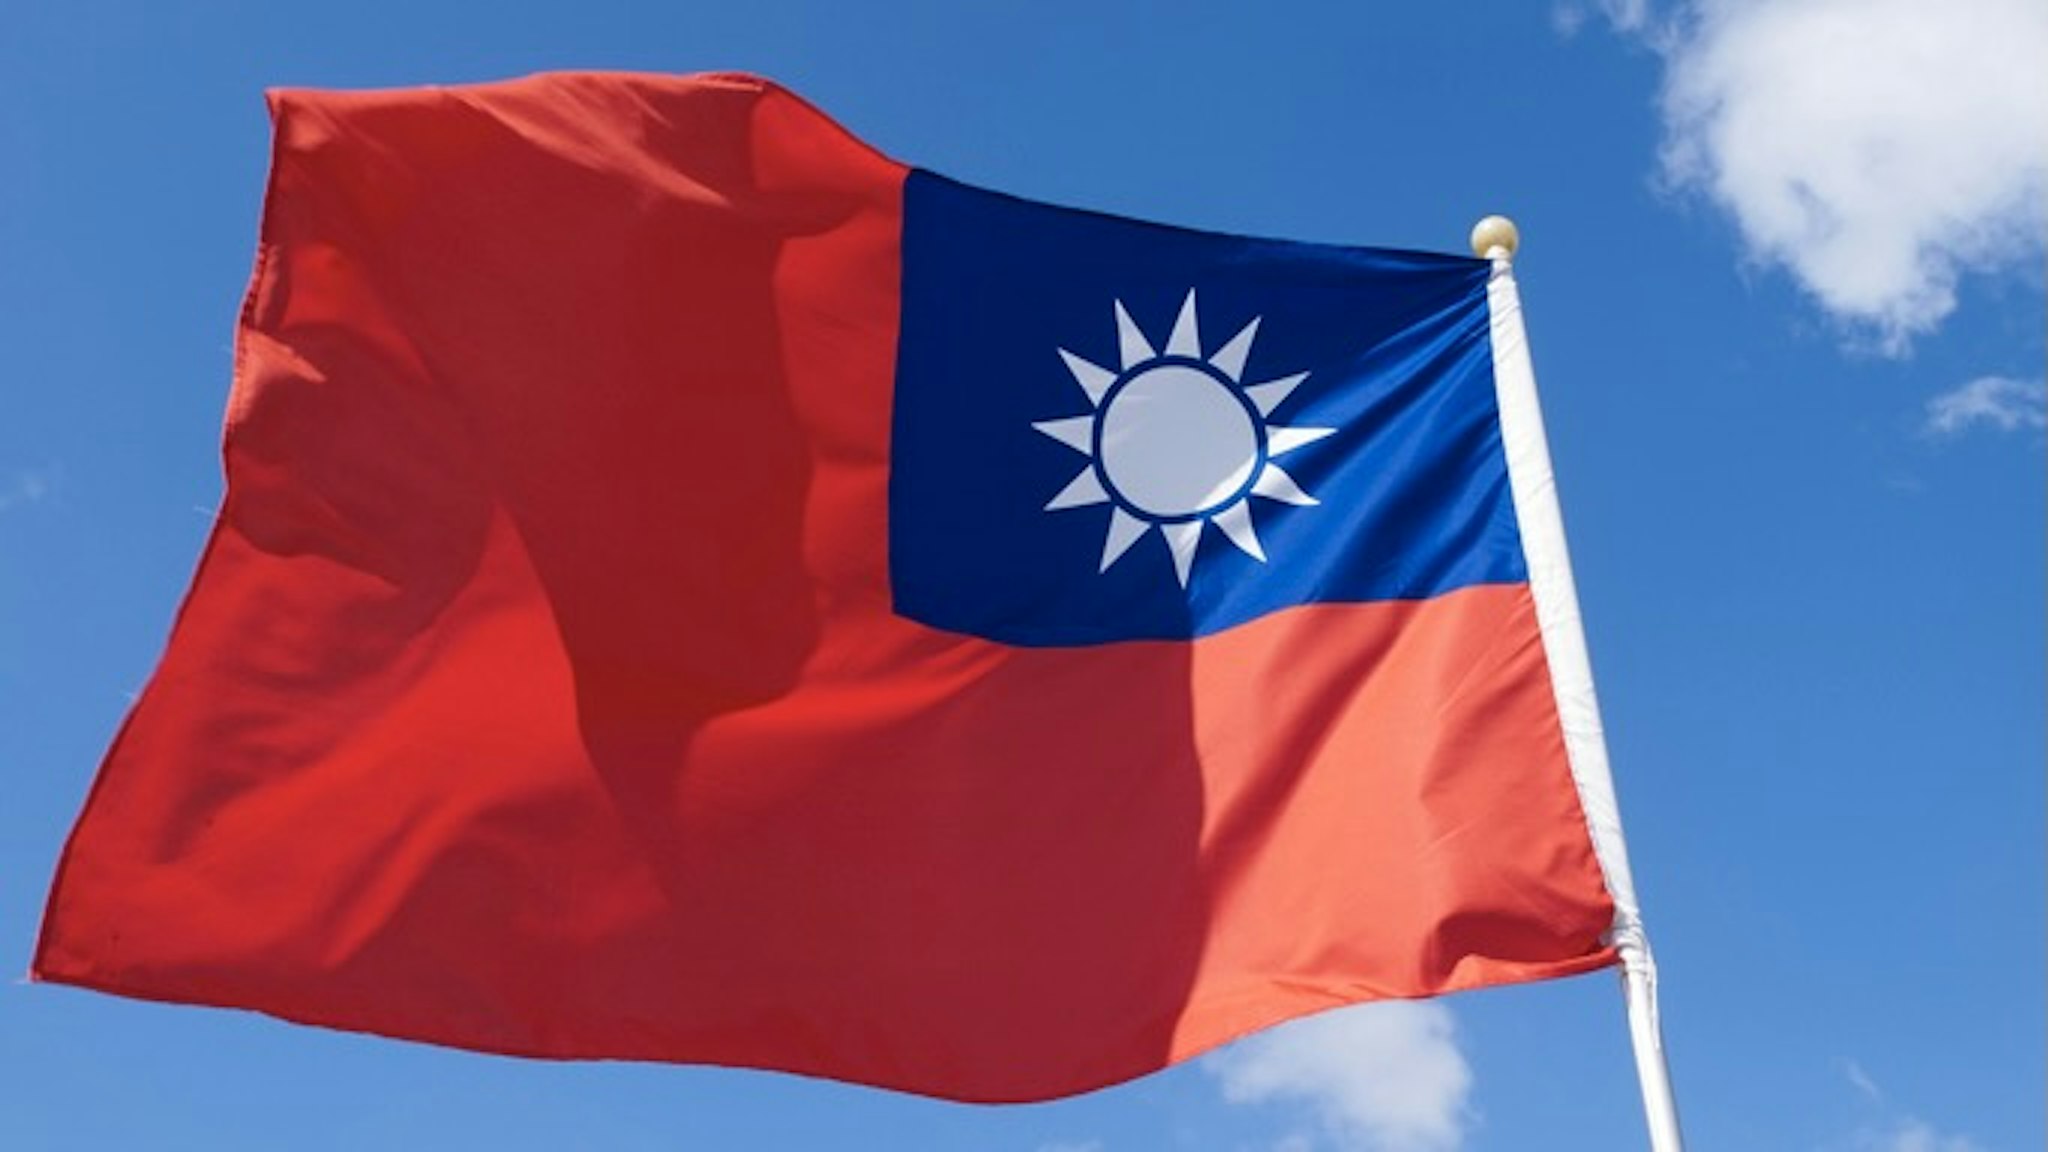 Taiwan Flag - stock photo Flag of the Republic of China, (Taiwan) in sunlight holgs via Getty Images